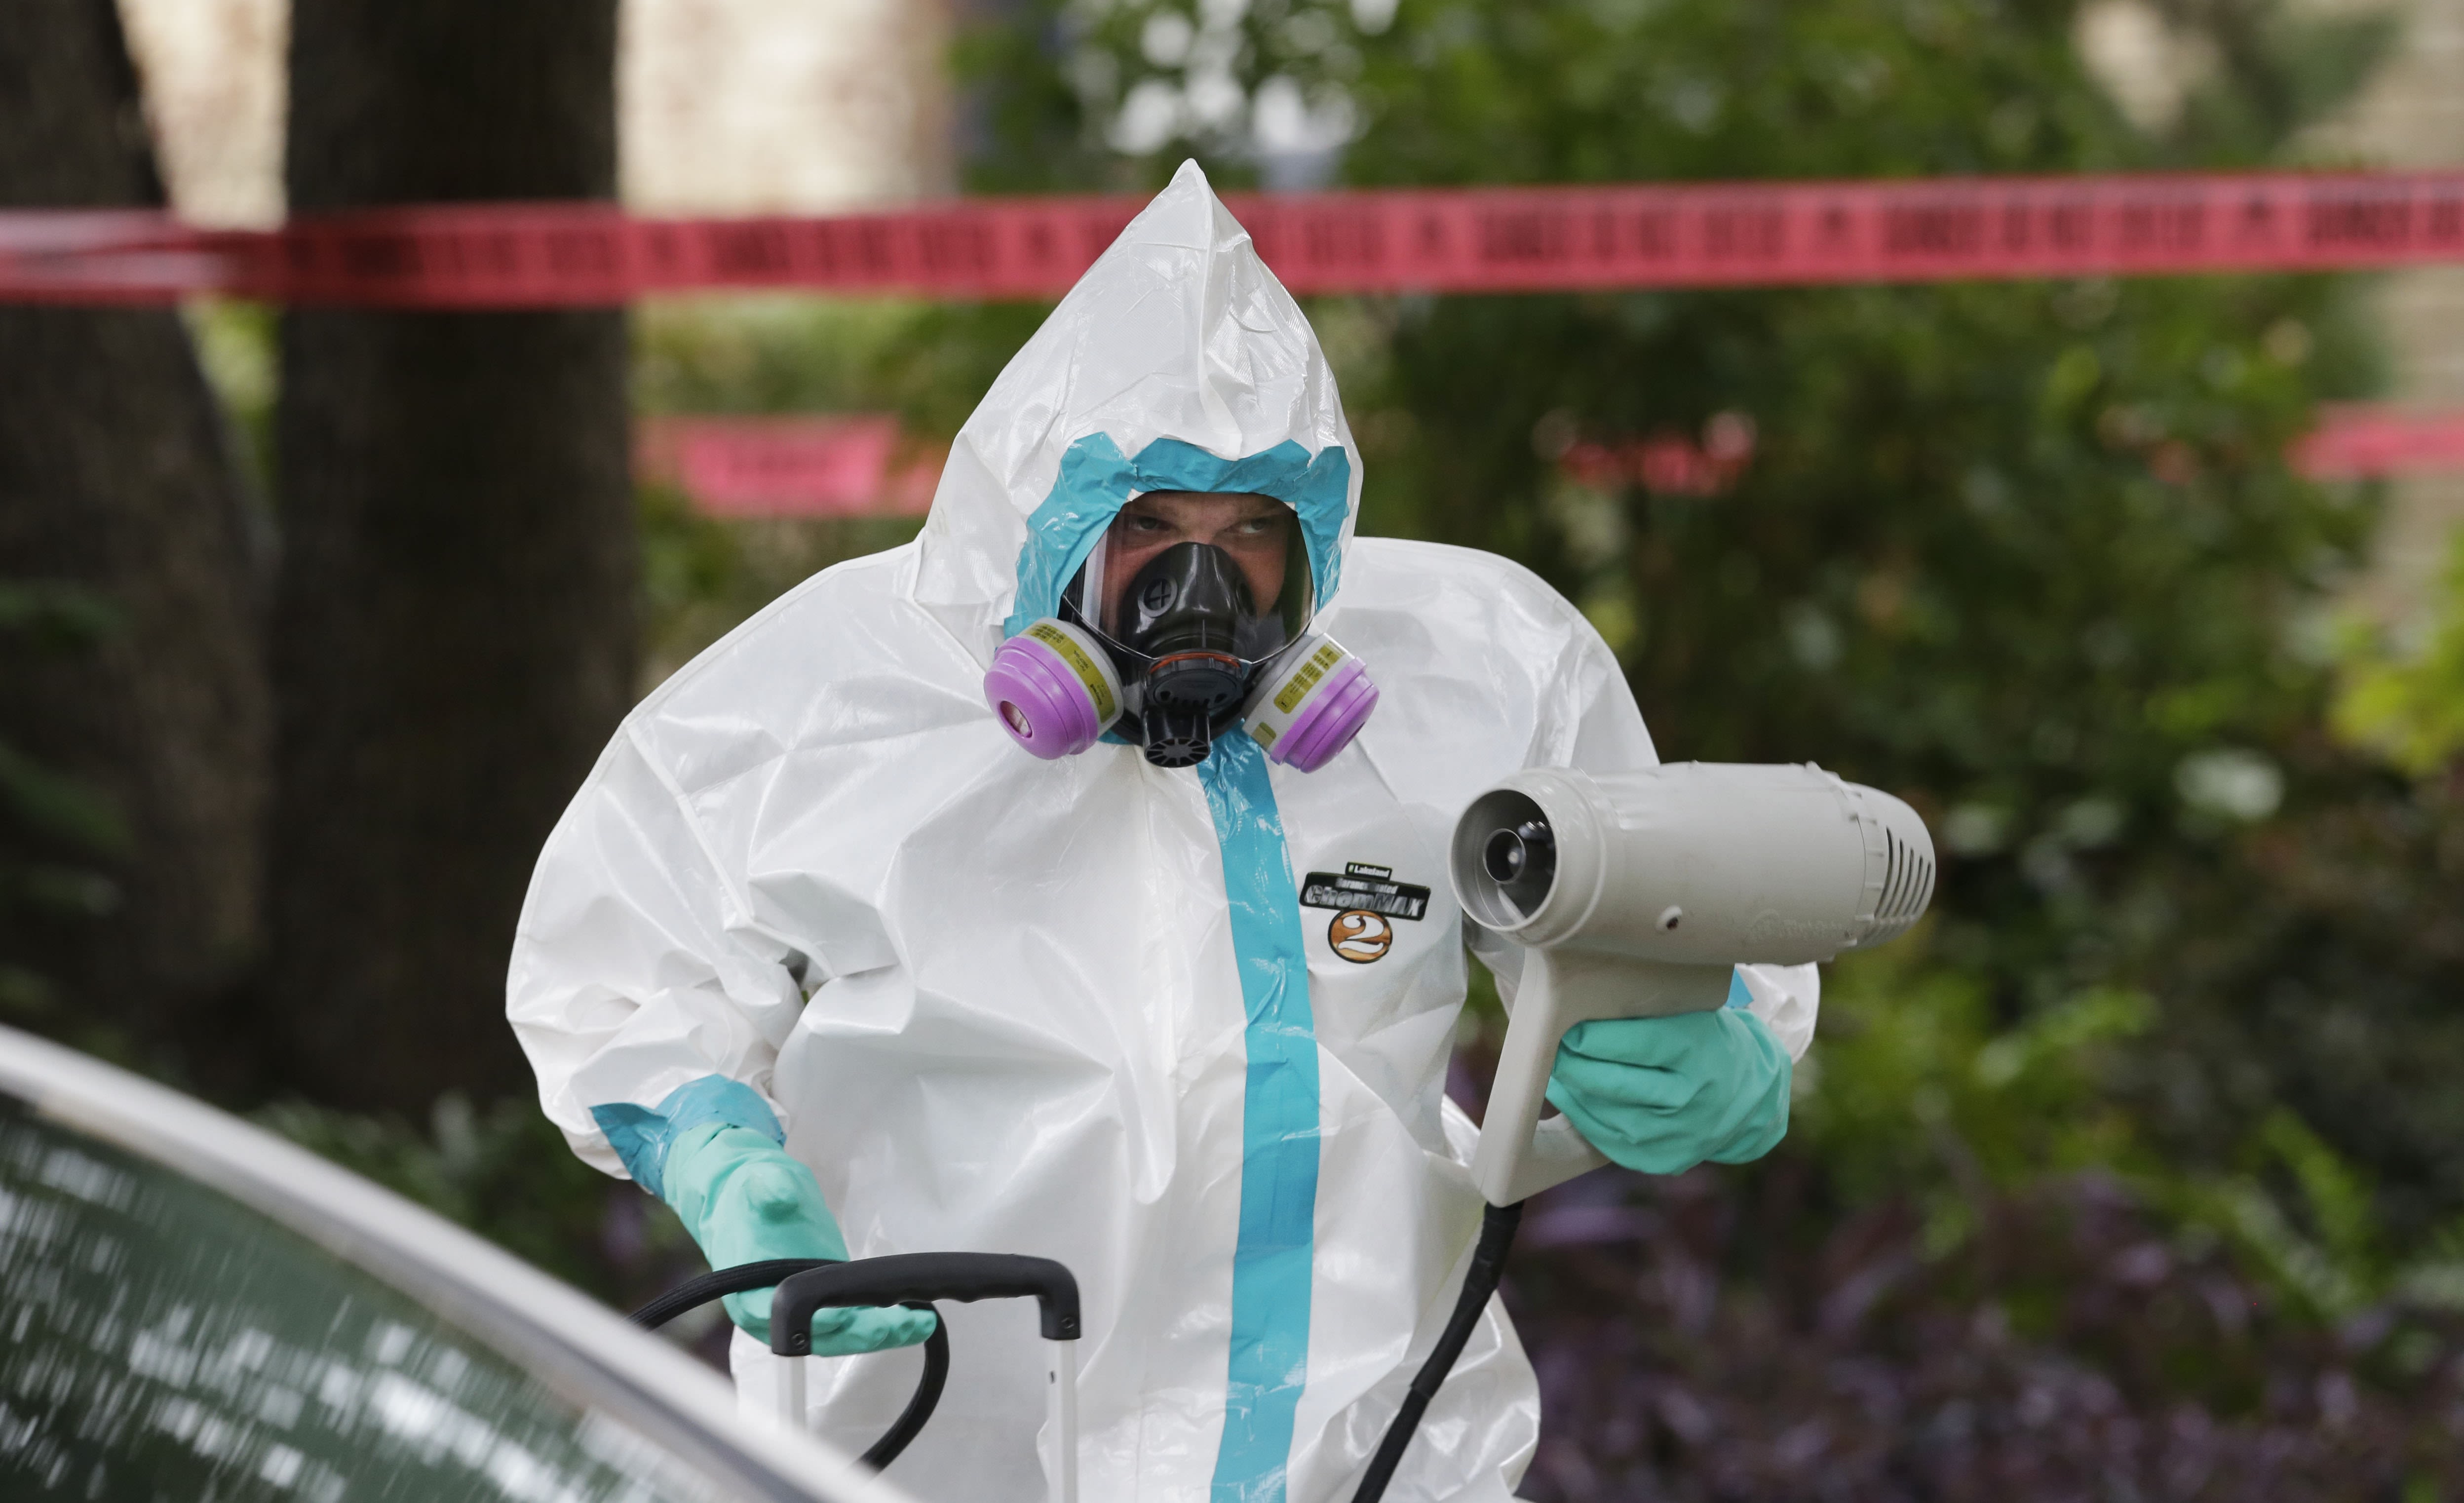 Ebola armor: Protective gear for healthcare workers - Los Angeles